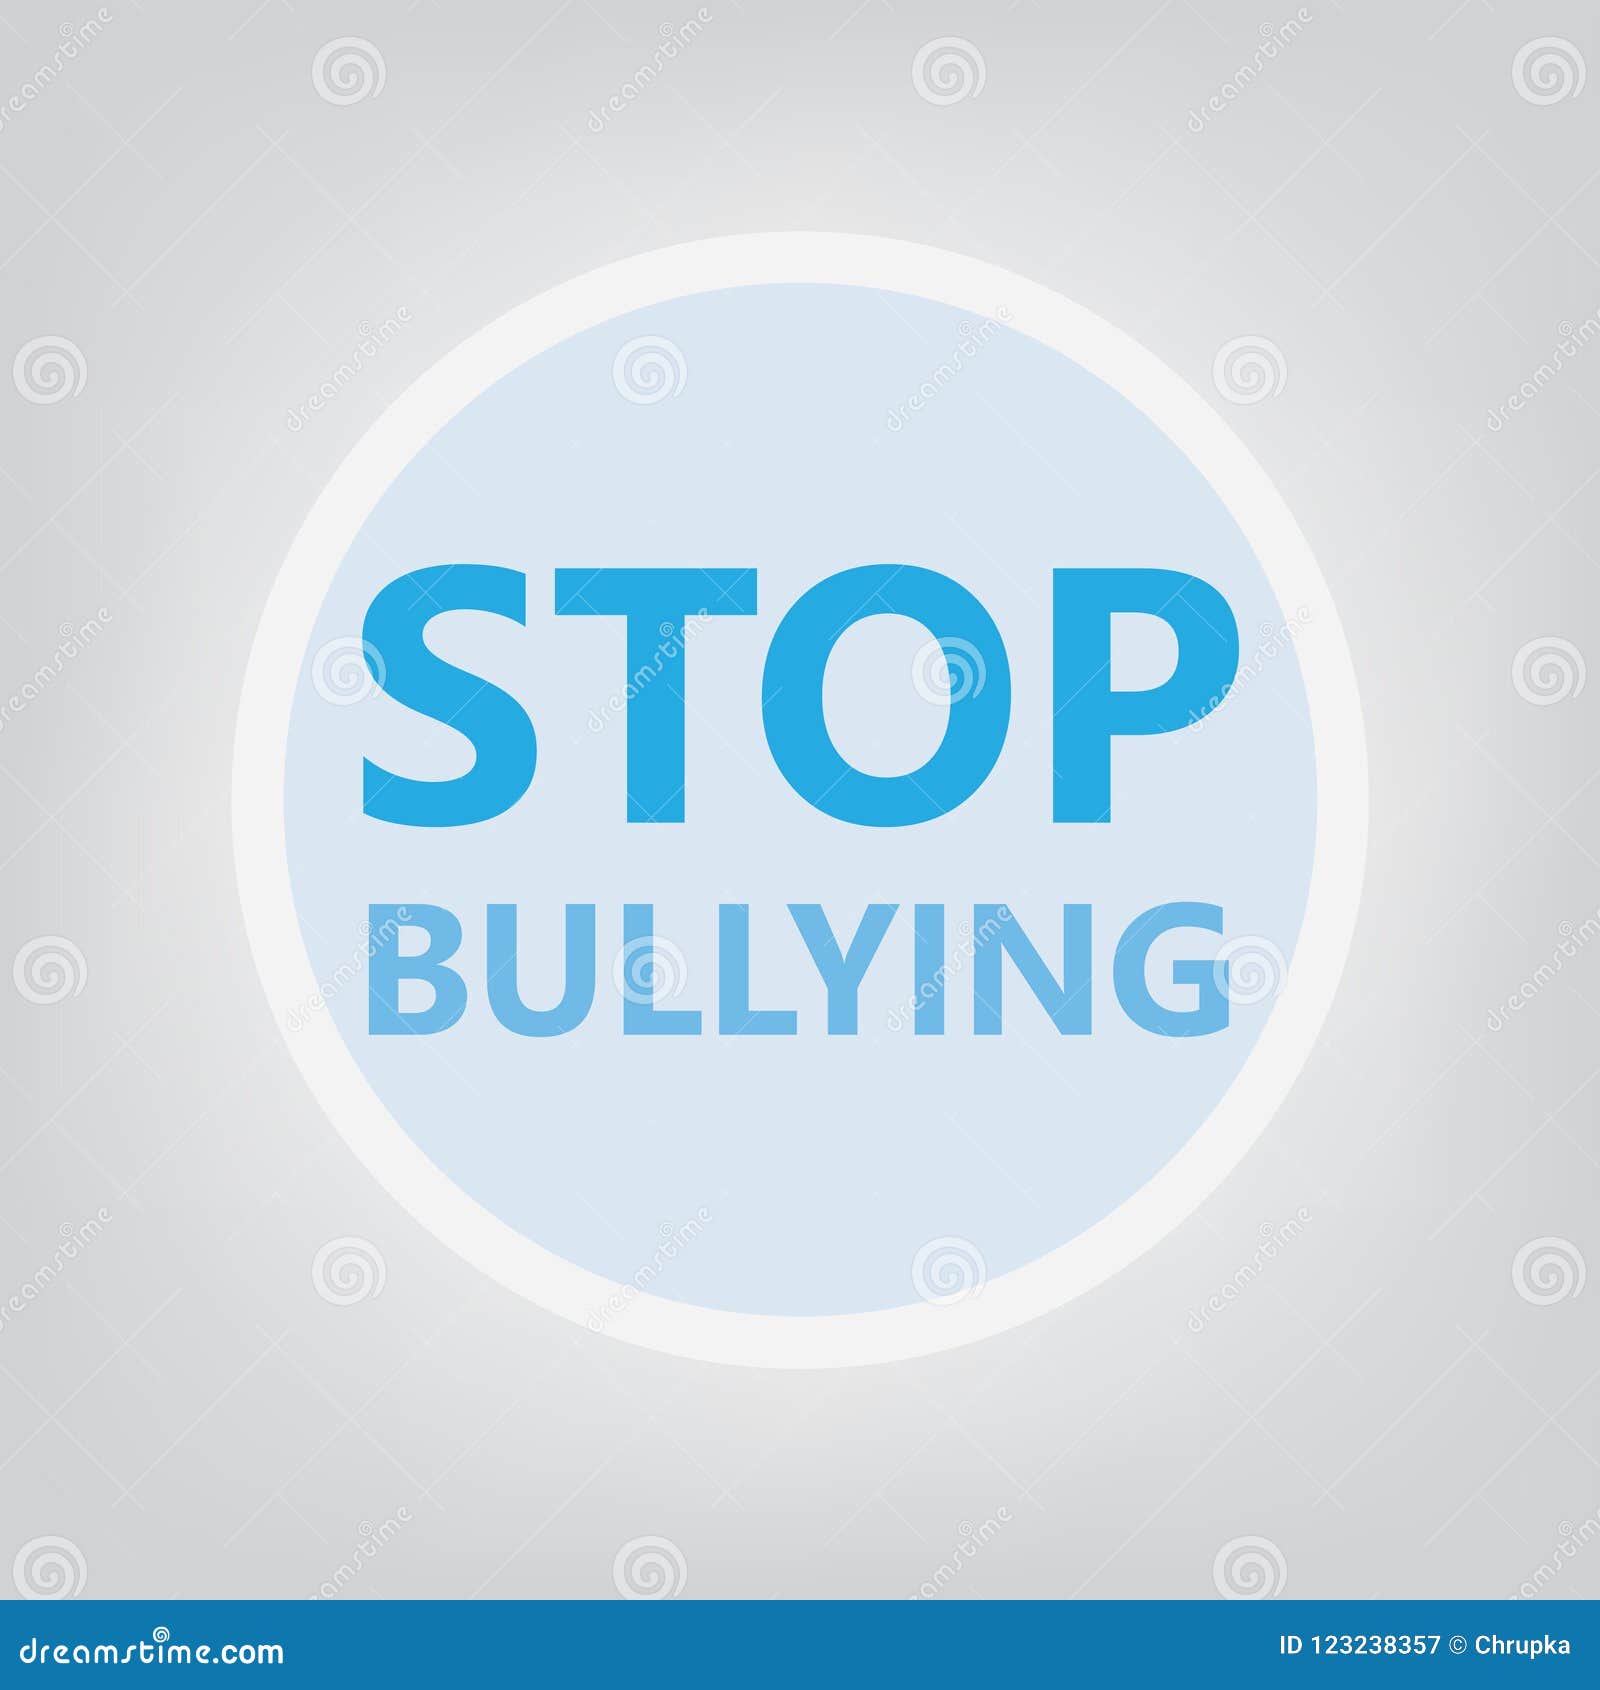 Stop bullying concept stock vector. Illustration of problem - 123238357